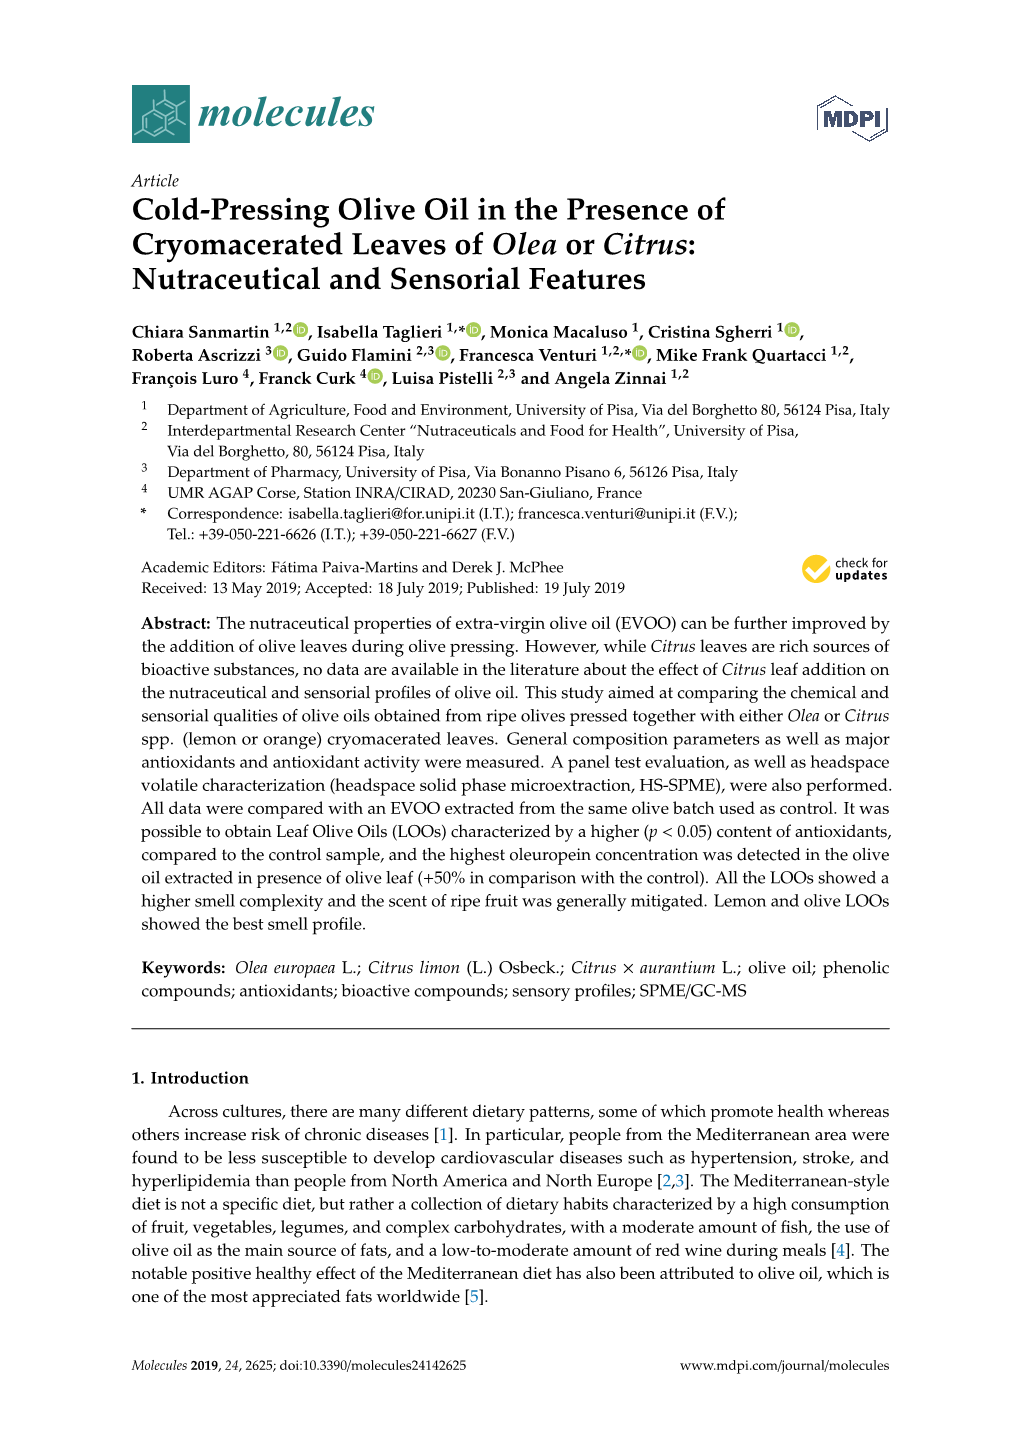 Cold-Pressing Olive Oil in the Presence of Cryomacerated Leaves of Olea Or Citrus: Nutraceutical and Sensorial Features